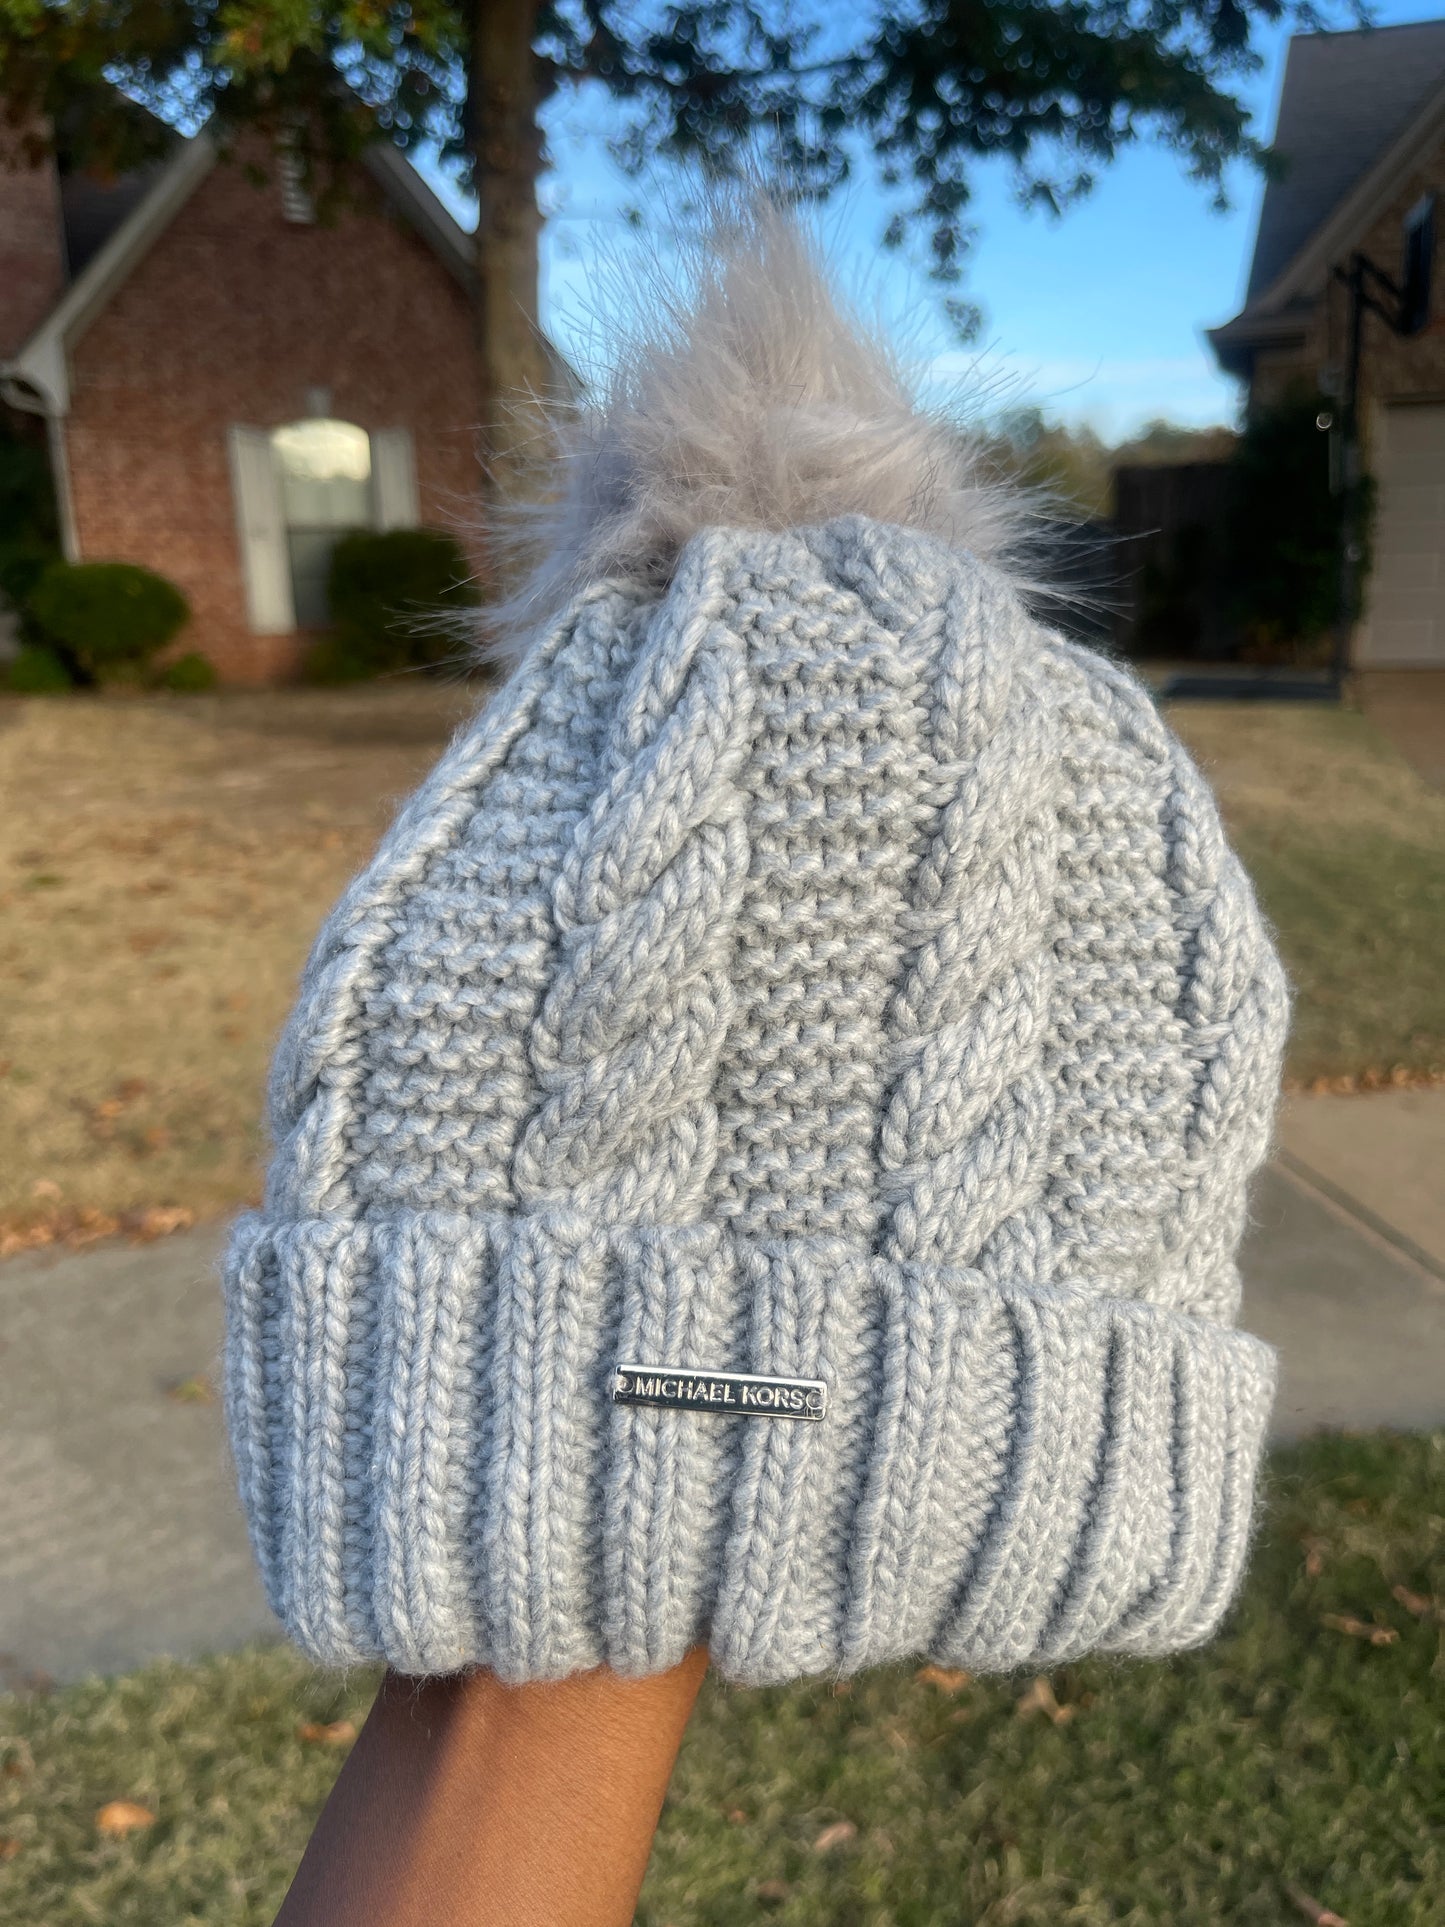 Michael kors gray beanie adults one size